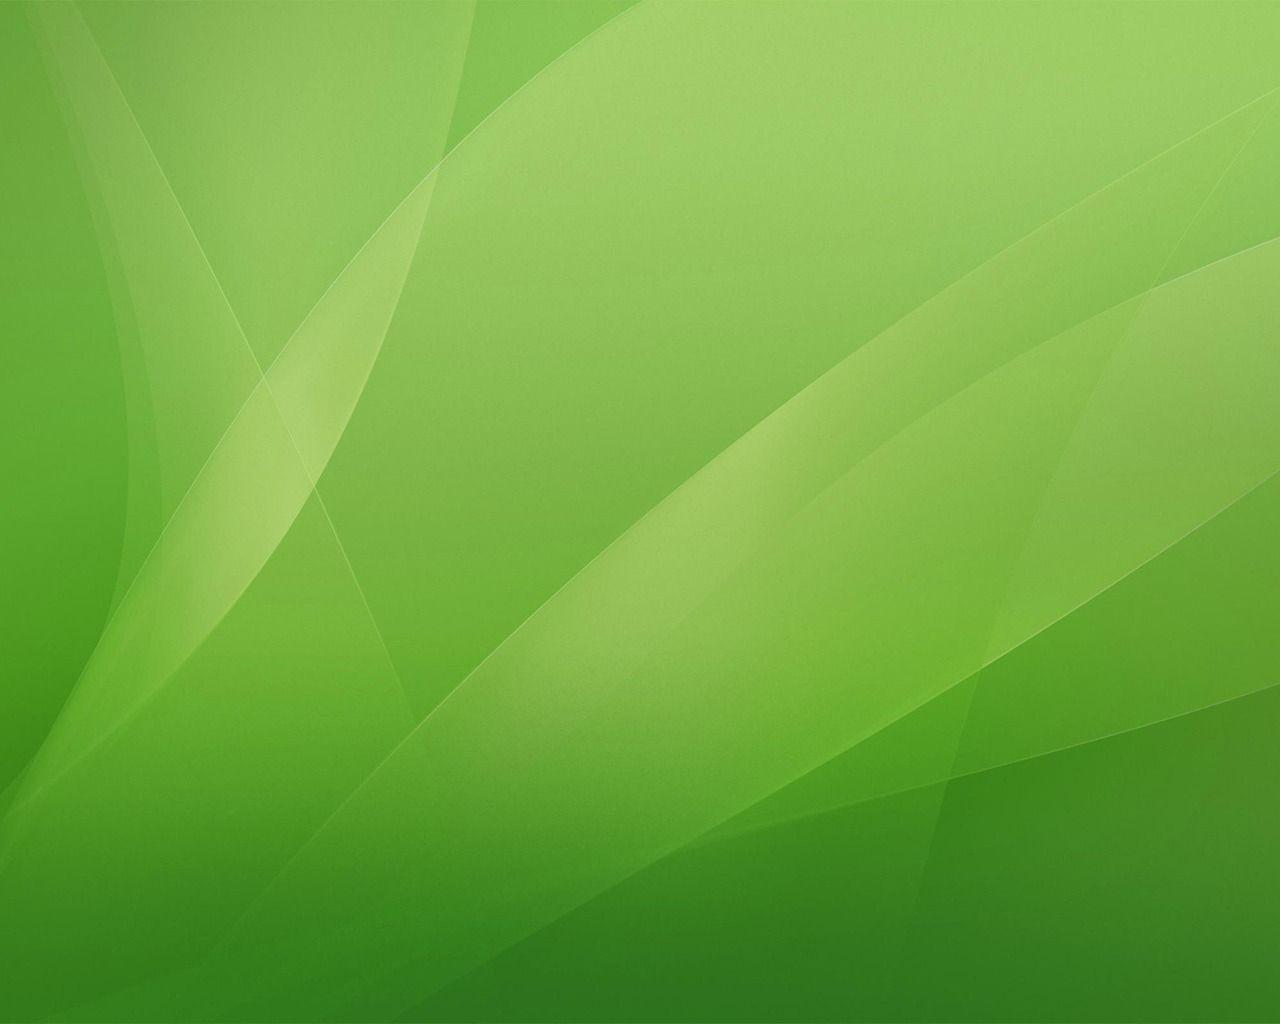 Green Wallpaper Abstract Other Wallpaper in jpg format for free